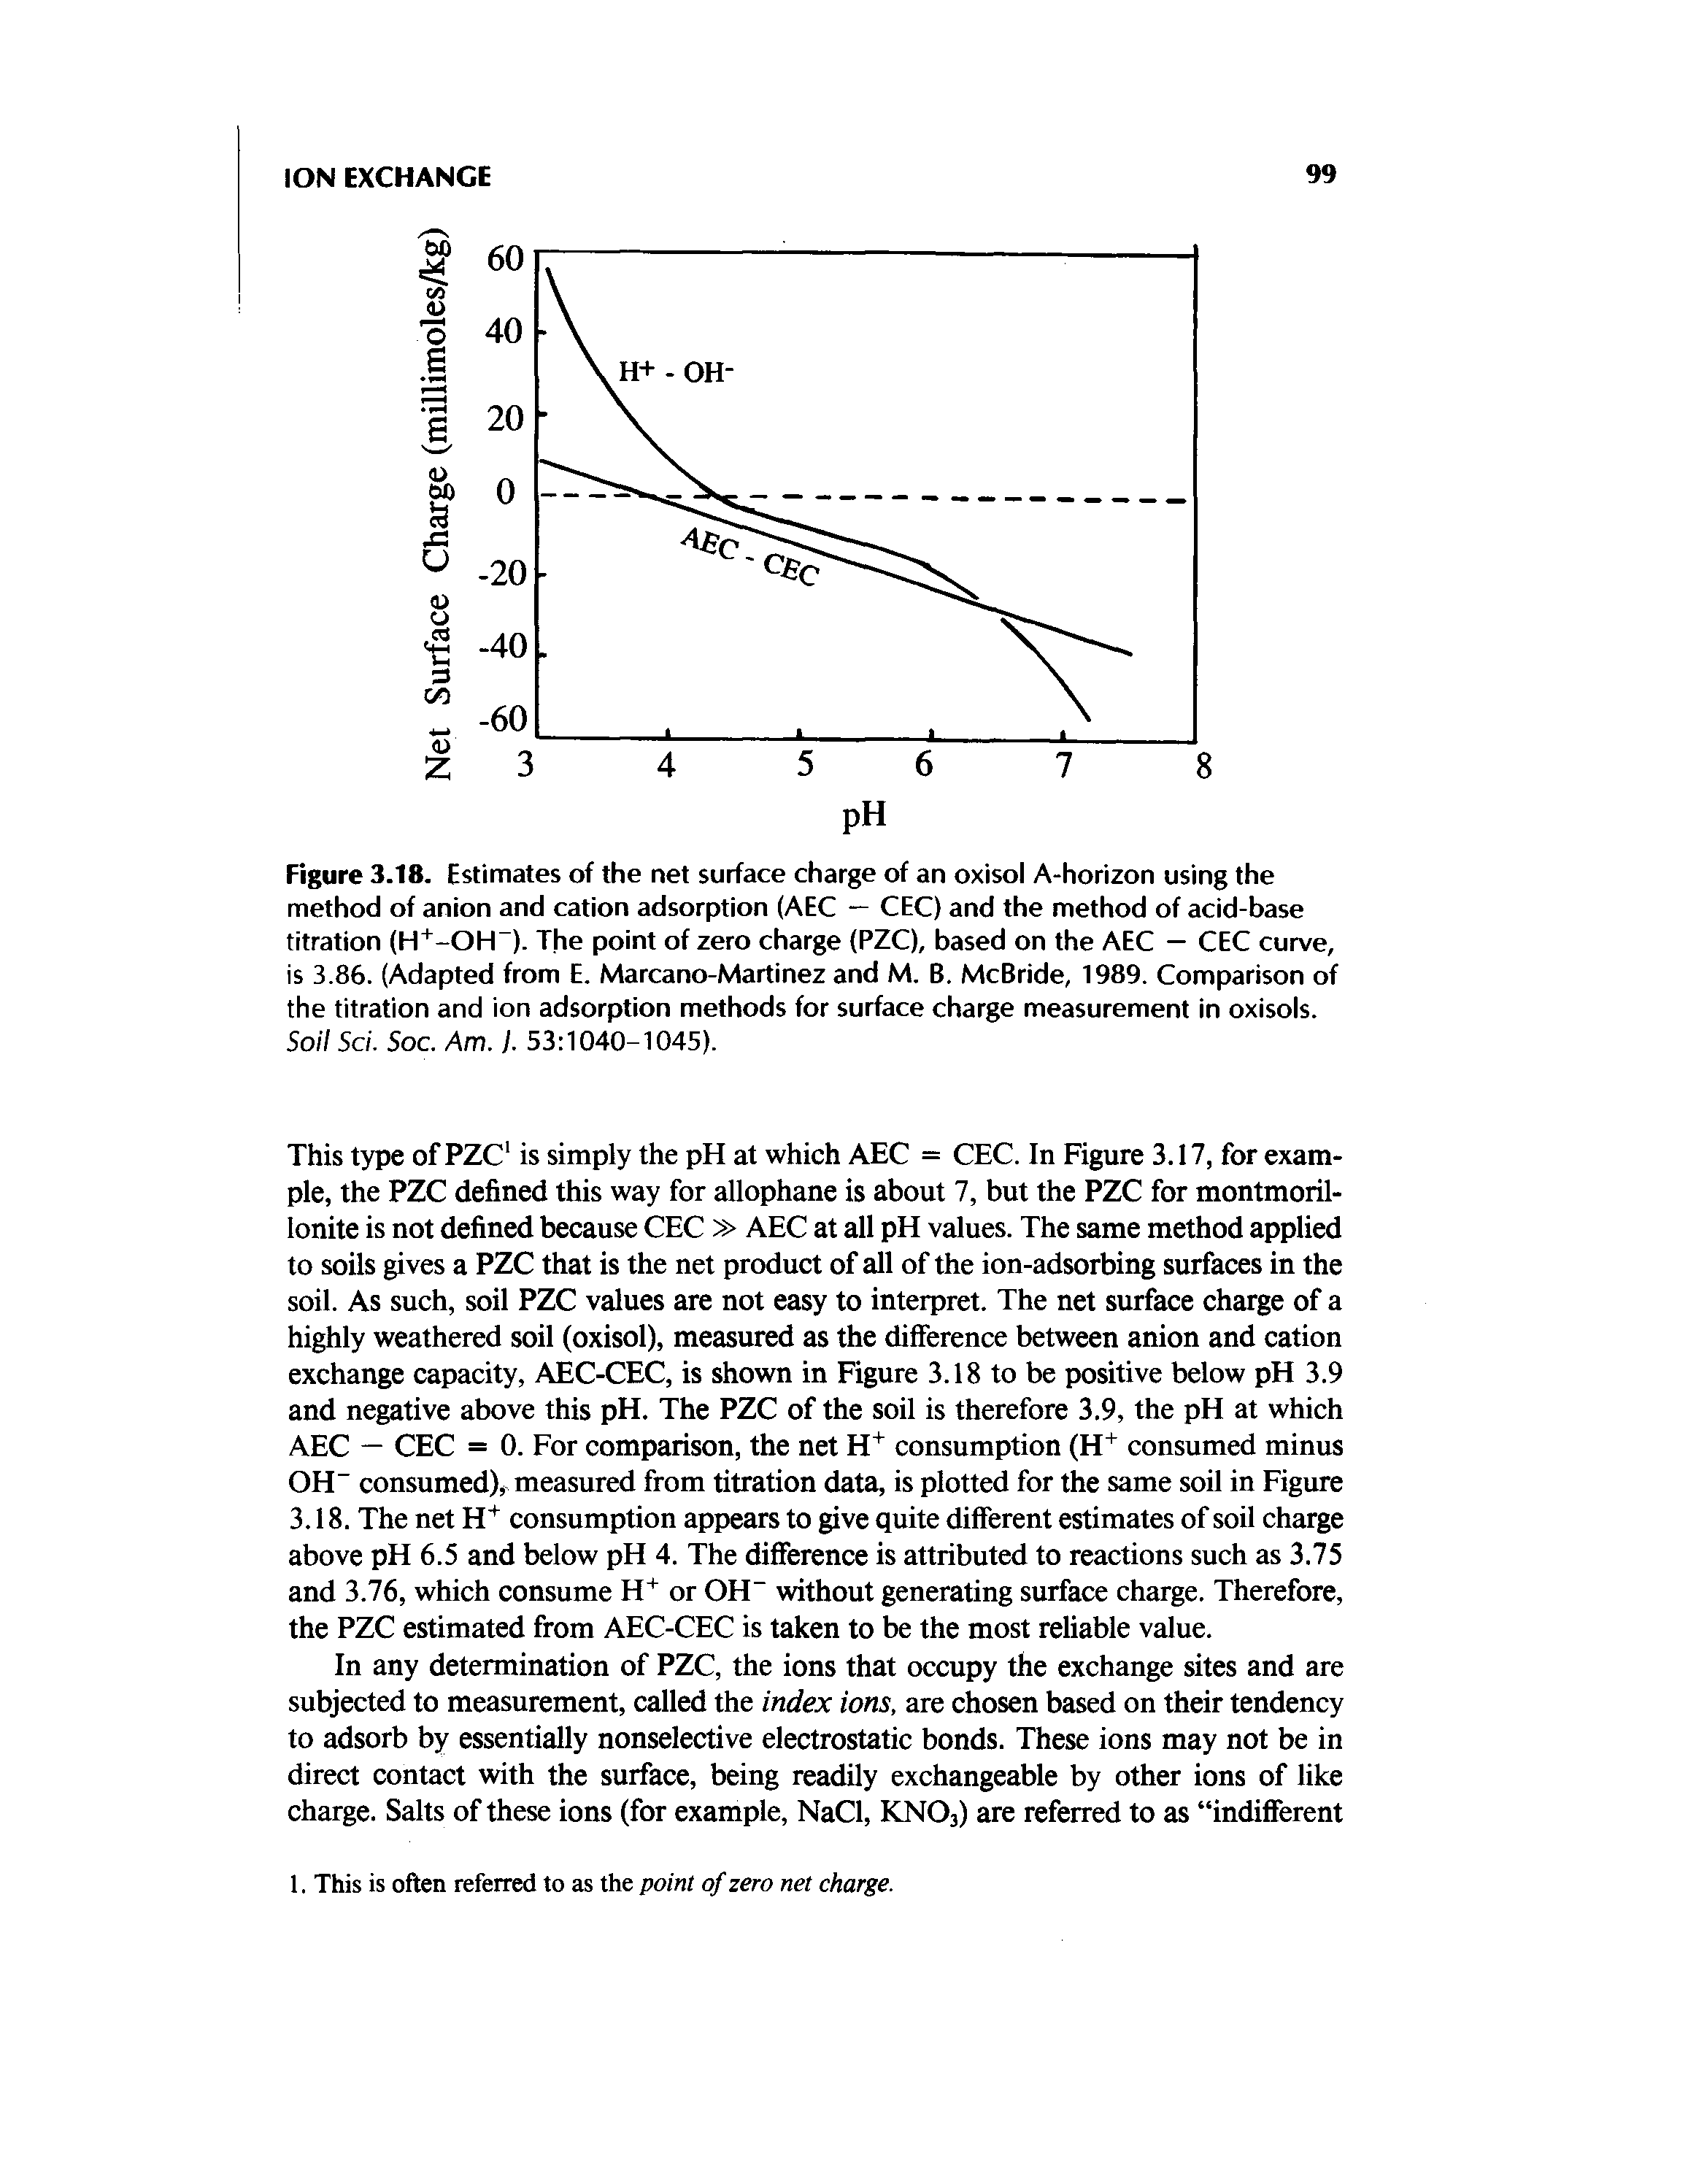 Figure 3.18. Estimates of the net surface charge of an oxisol A-horizon using the method of anion and cation adsorption (AEC — CEC) and the method of acid-base titration (H -OH ). The point of zero charge (PZC), based on the AEC — CEC curve, is 3.86. (Adapted from E. Marcano-Martinez and M. B. McBride, 1989. Comparison of the titration and ion adsorption methods for surface charge measurement in oxisols. Soil Sci. Soc. Am. I. 53 1040-1045).